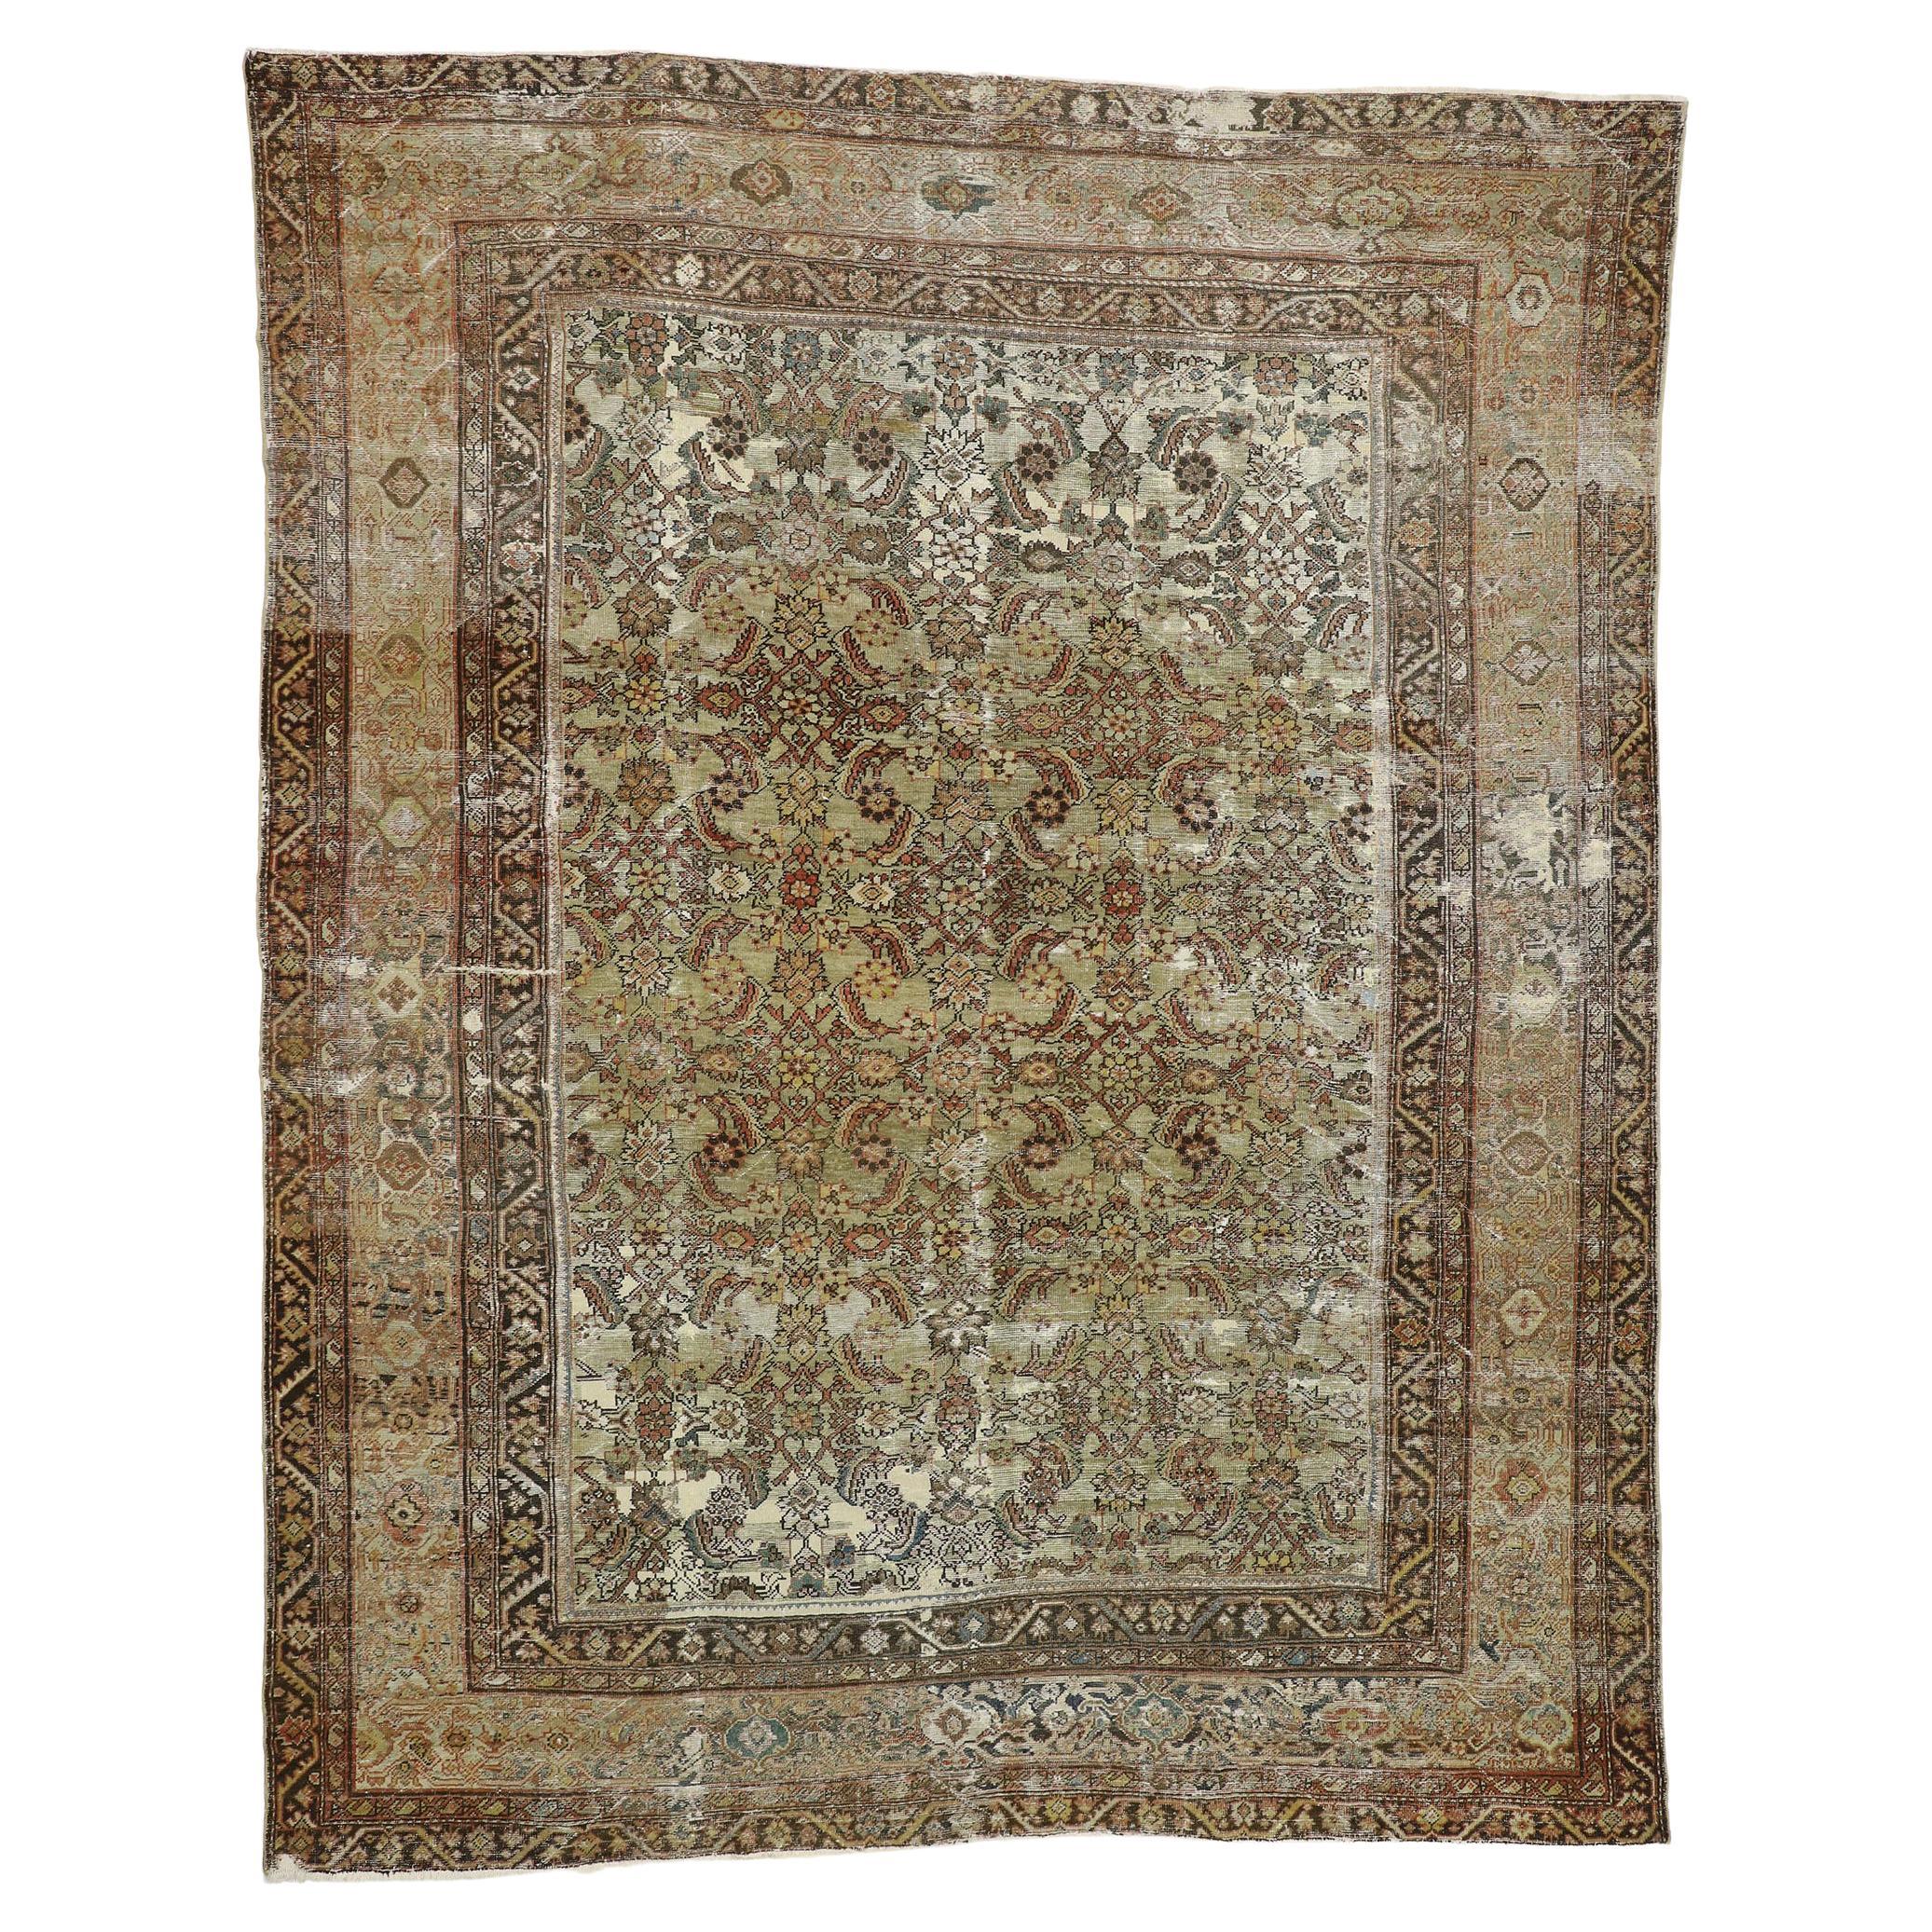 Distressed Antique Persian Sultanabad Rug with Modern Rustic Industrial Style For Sale